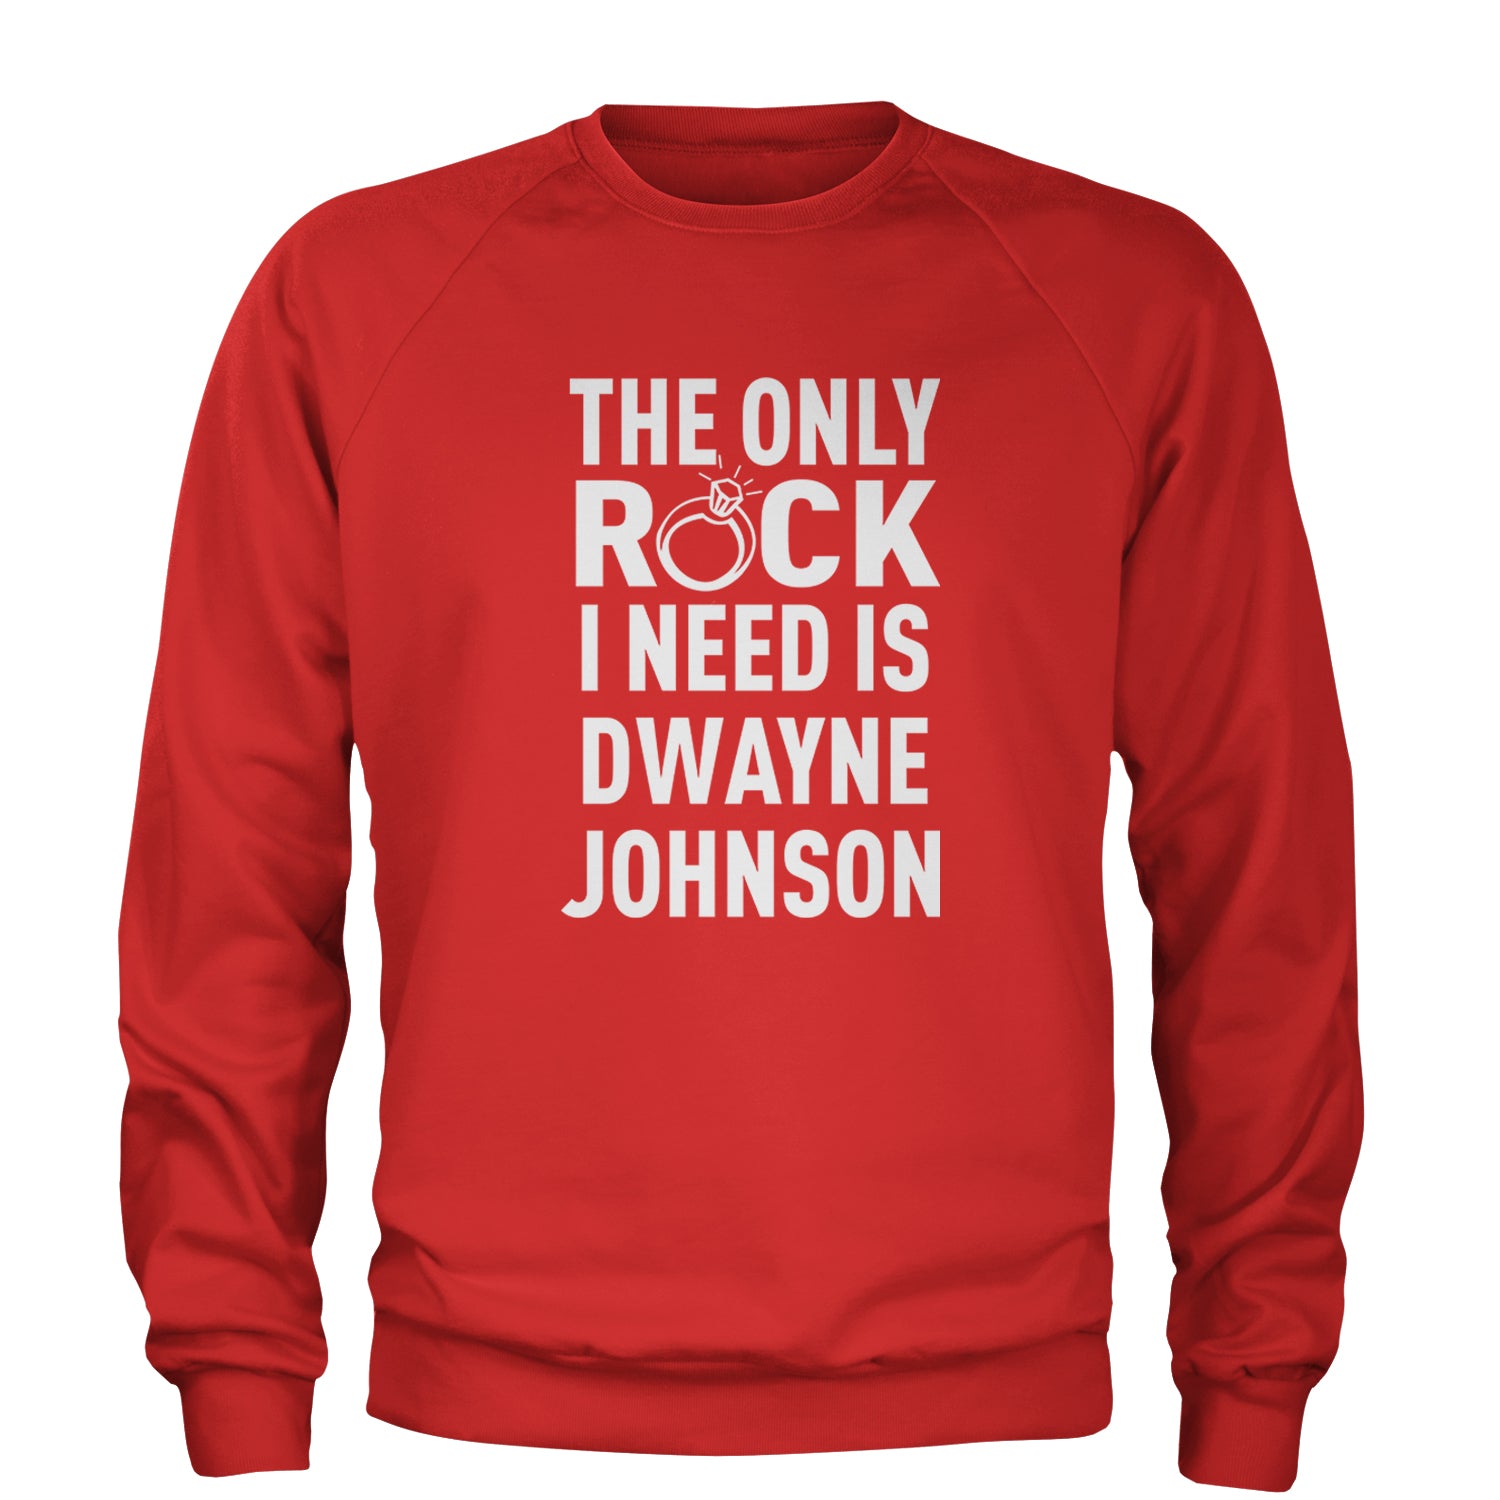 The Only Rock I Need Is Dwayne Johnson Adult Crewneck Sweatshirt dwayne, johnson, marry, me, ring, rock, the, wedding by Expression Tees